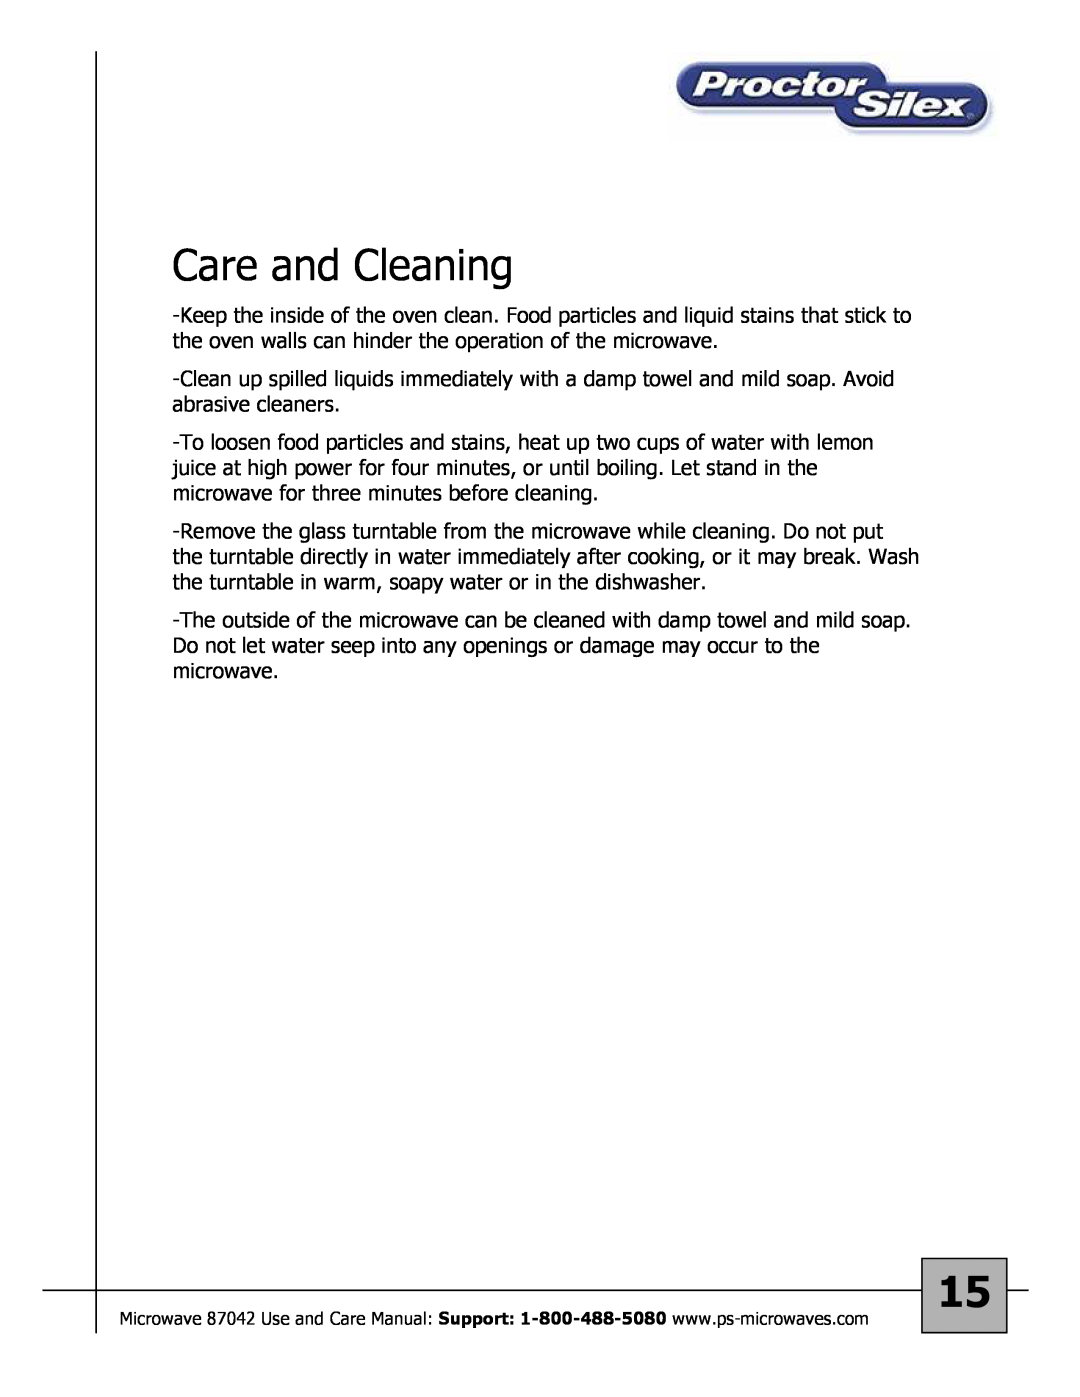 Proctor-Silex 87027 owner manual Care and Cleaning 